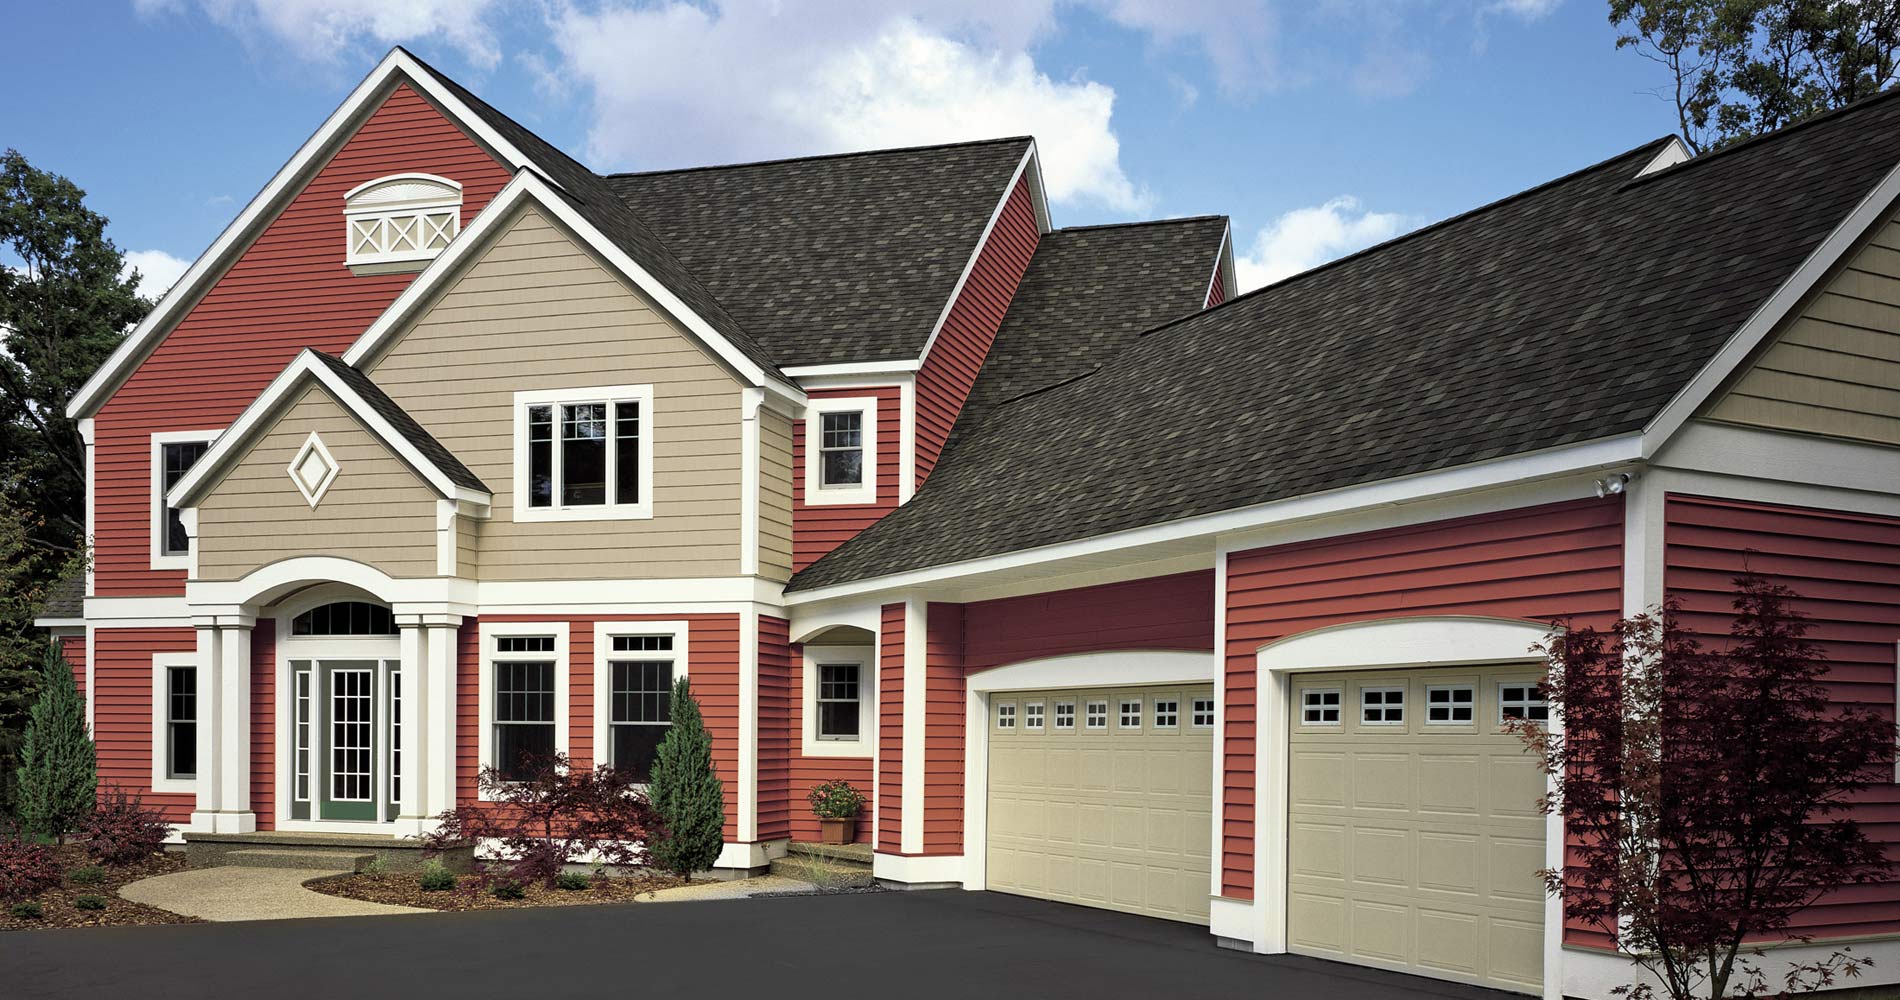 Arias Home Business - Central Jersey Siding Contractors